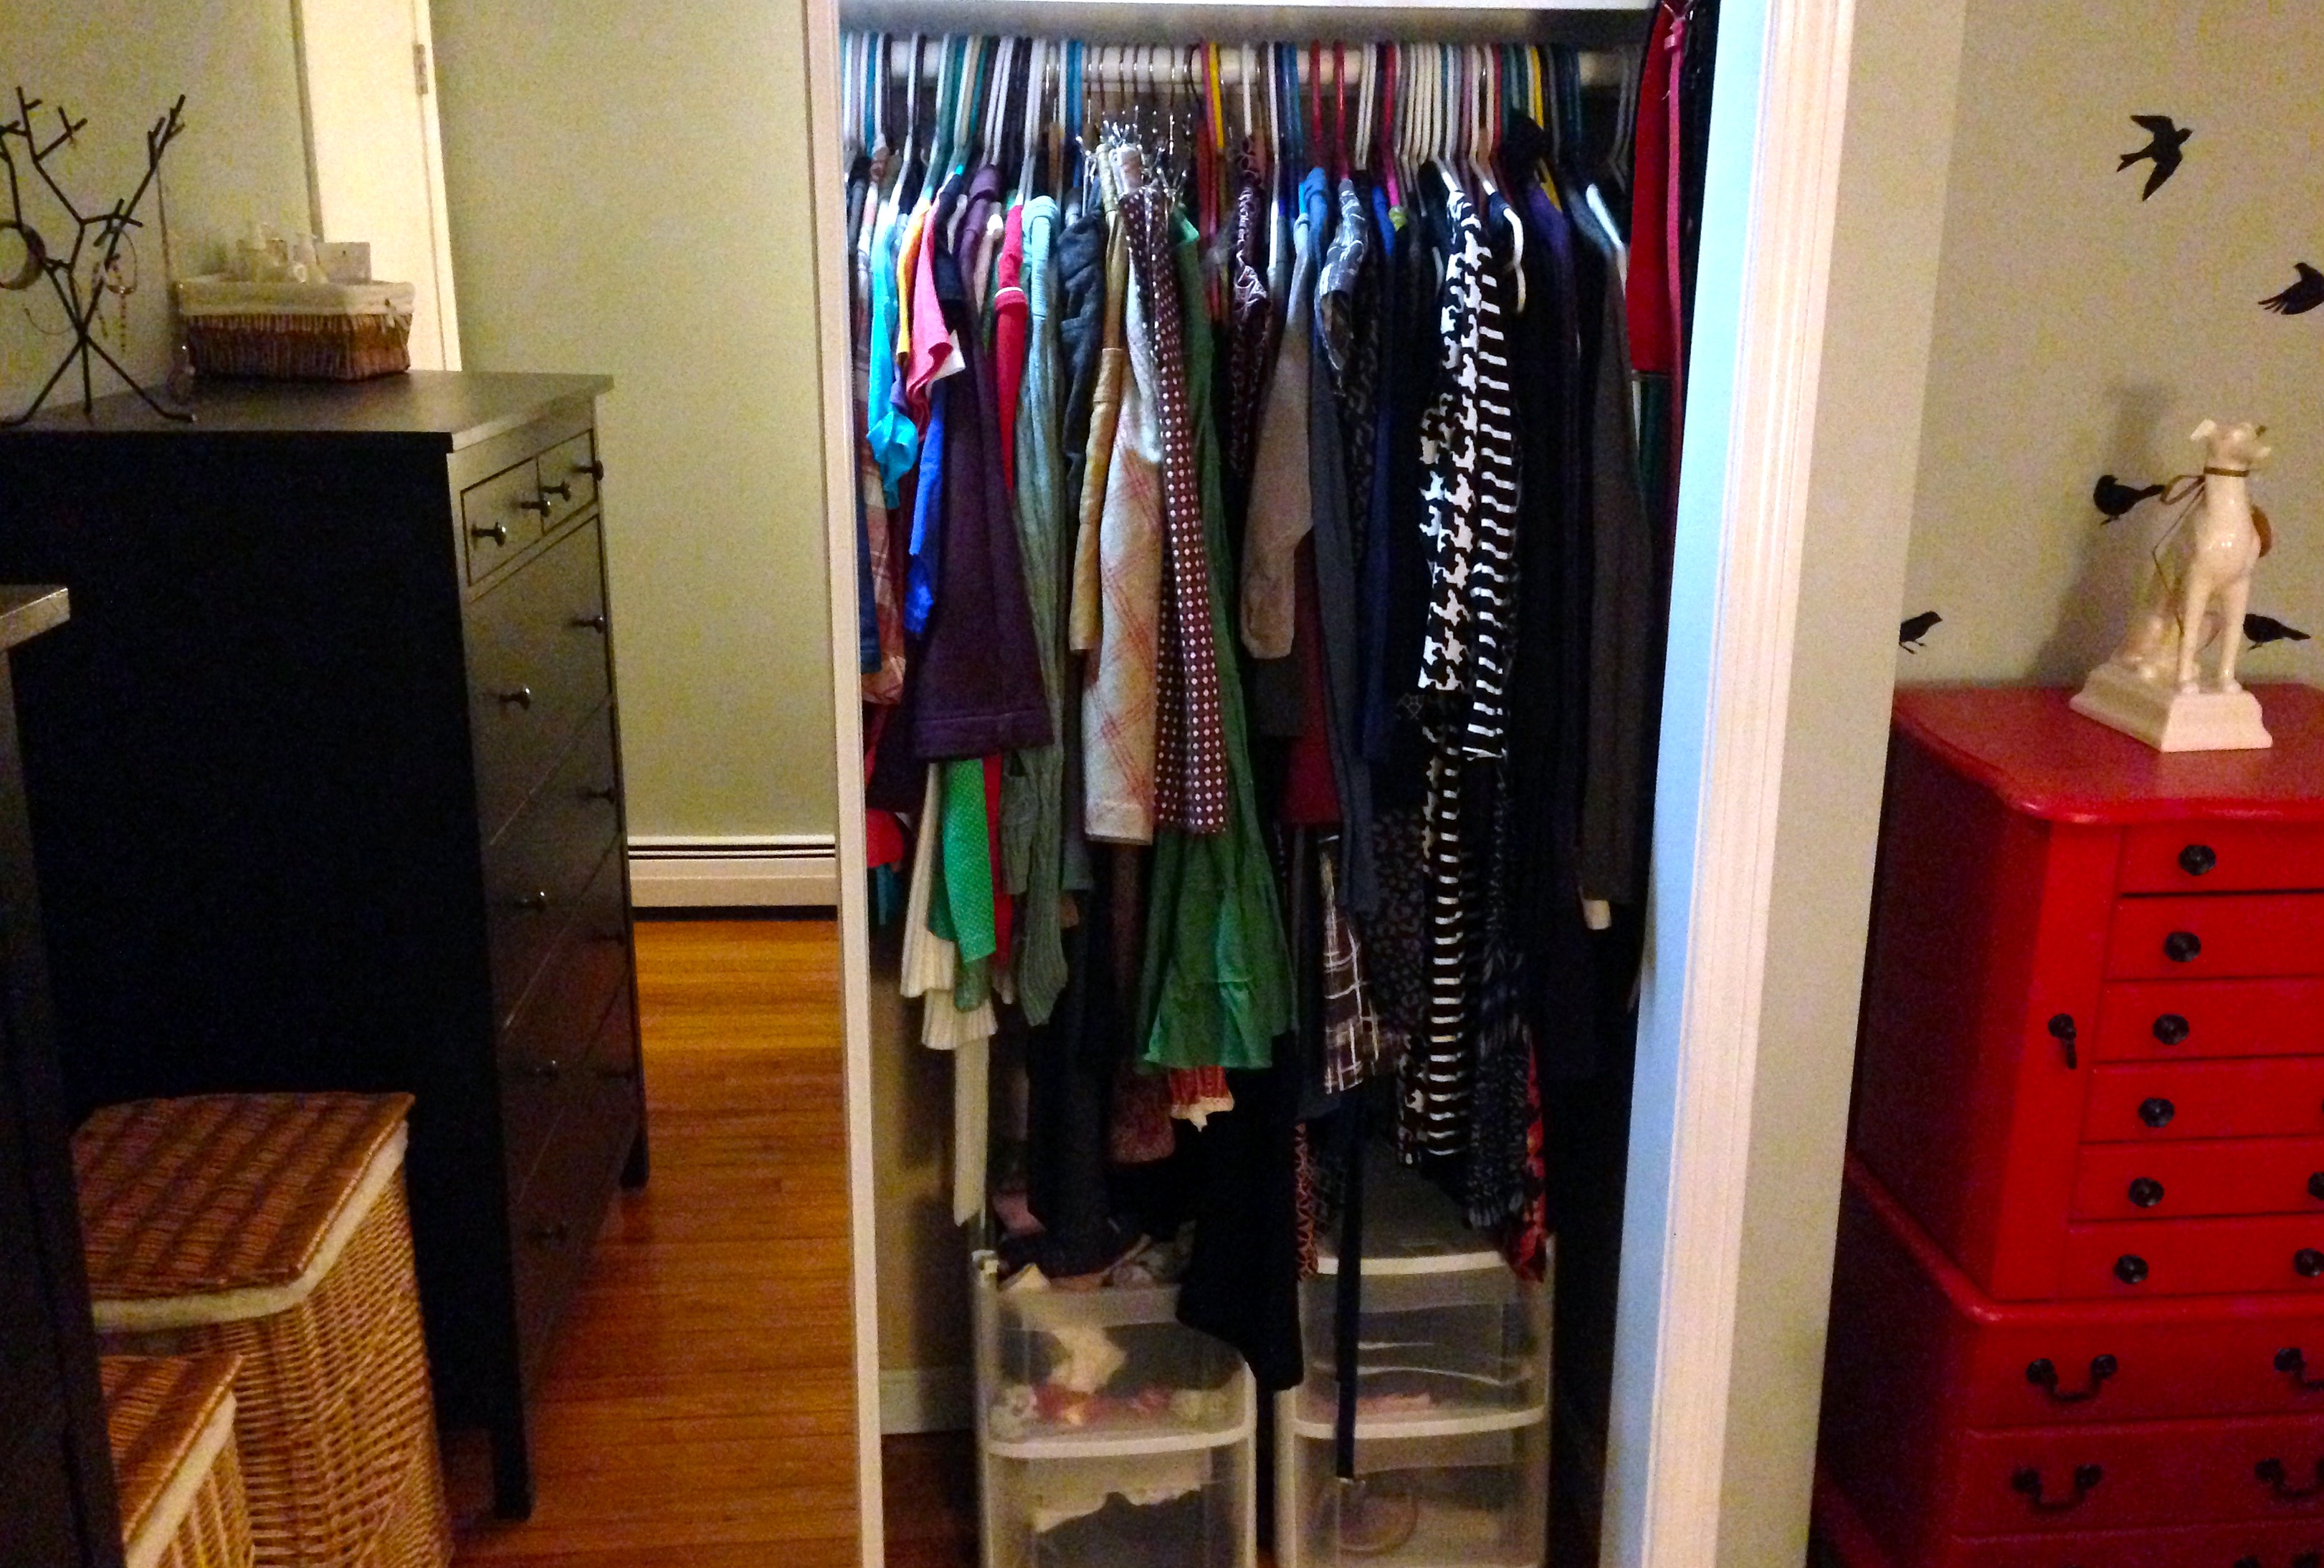 Our shared master bedroom closet